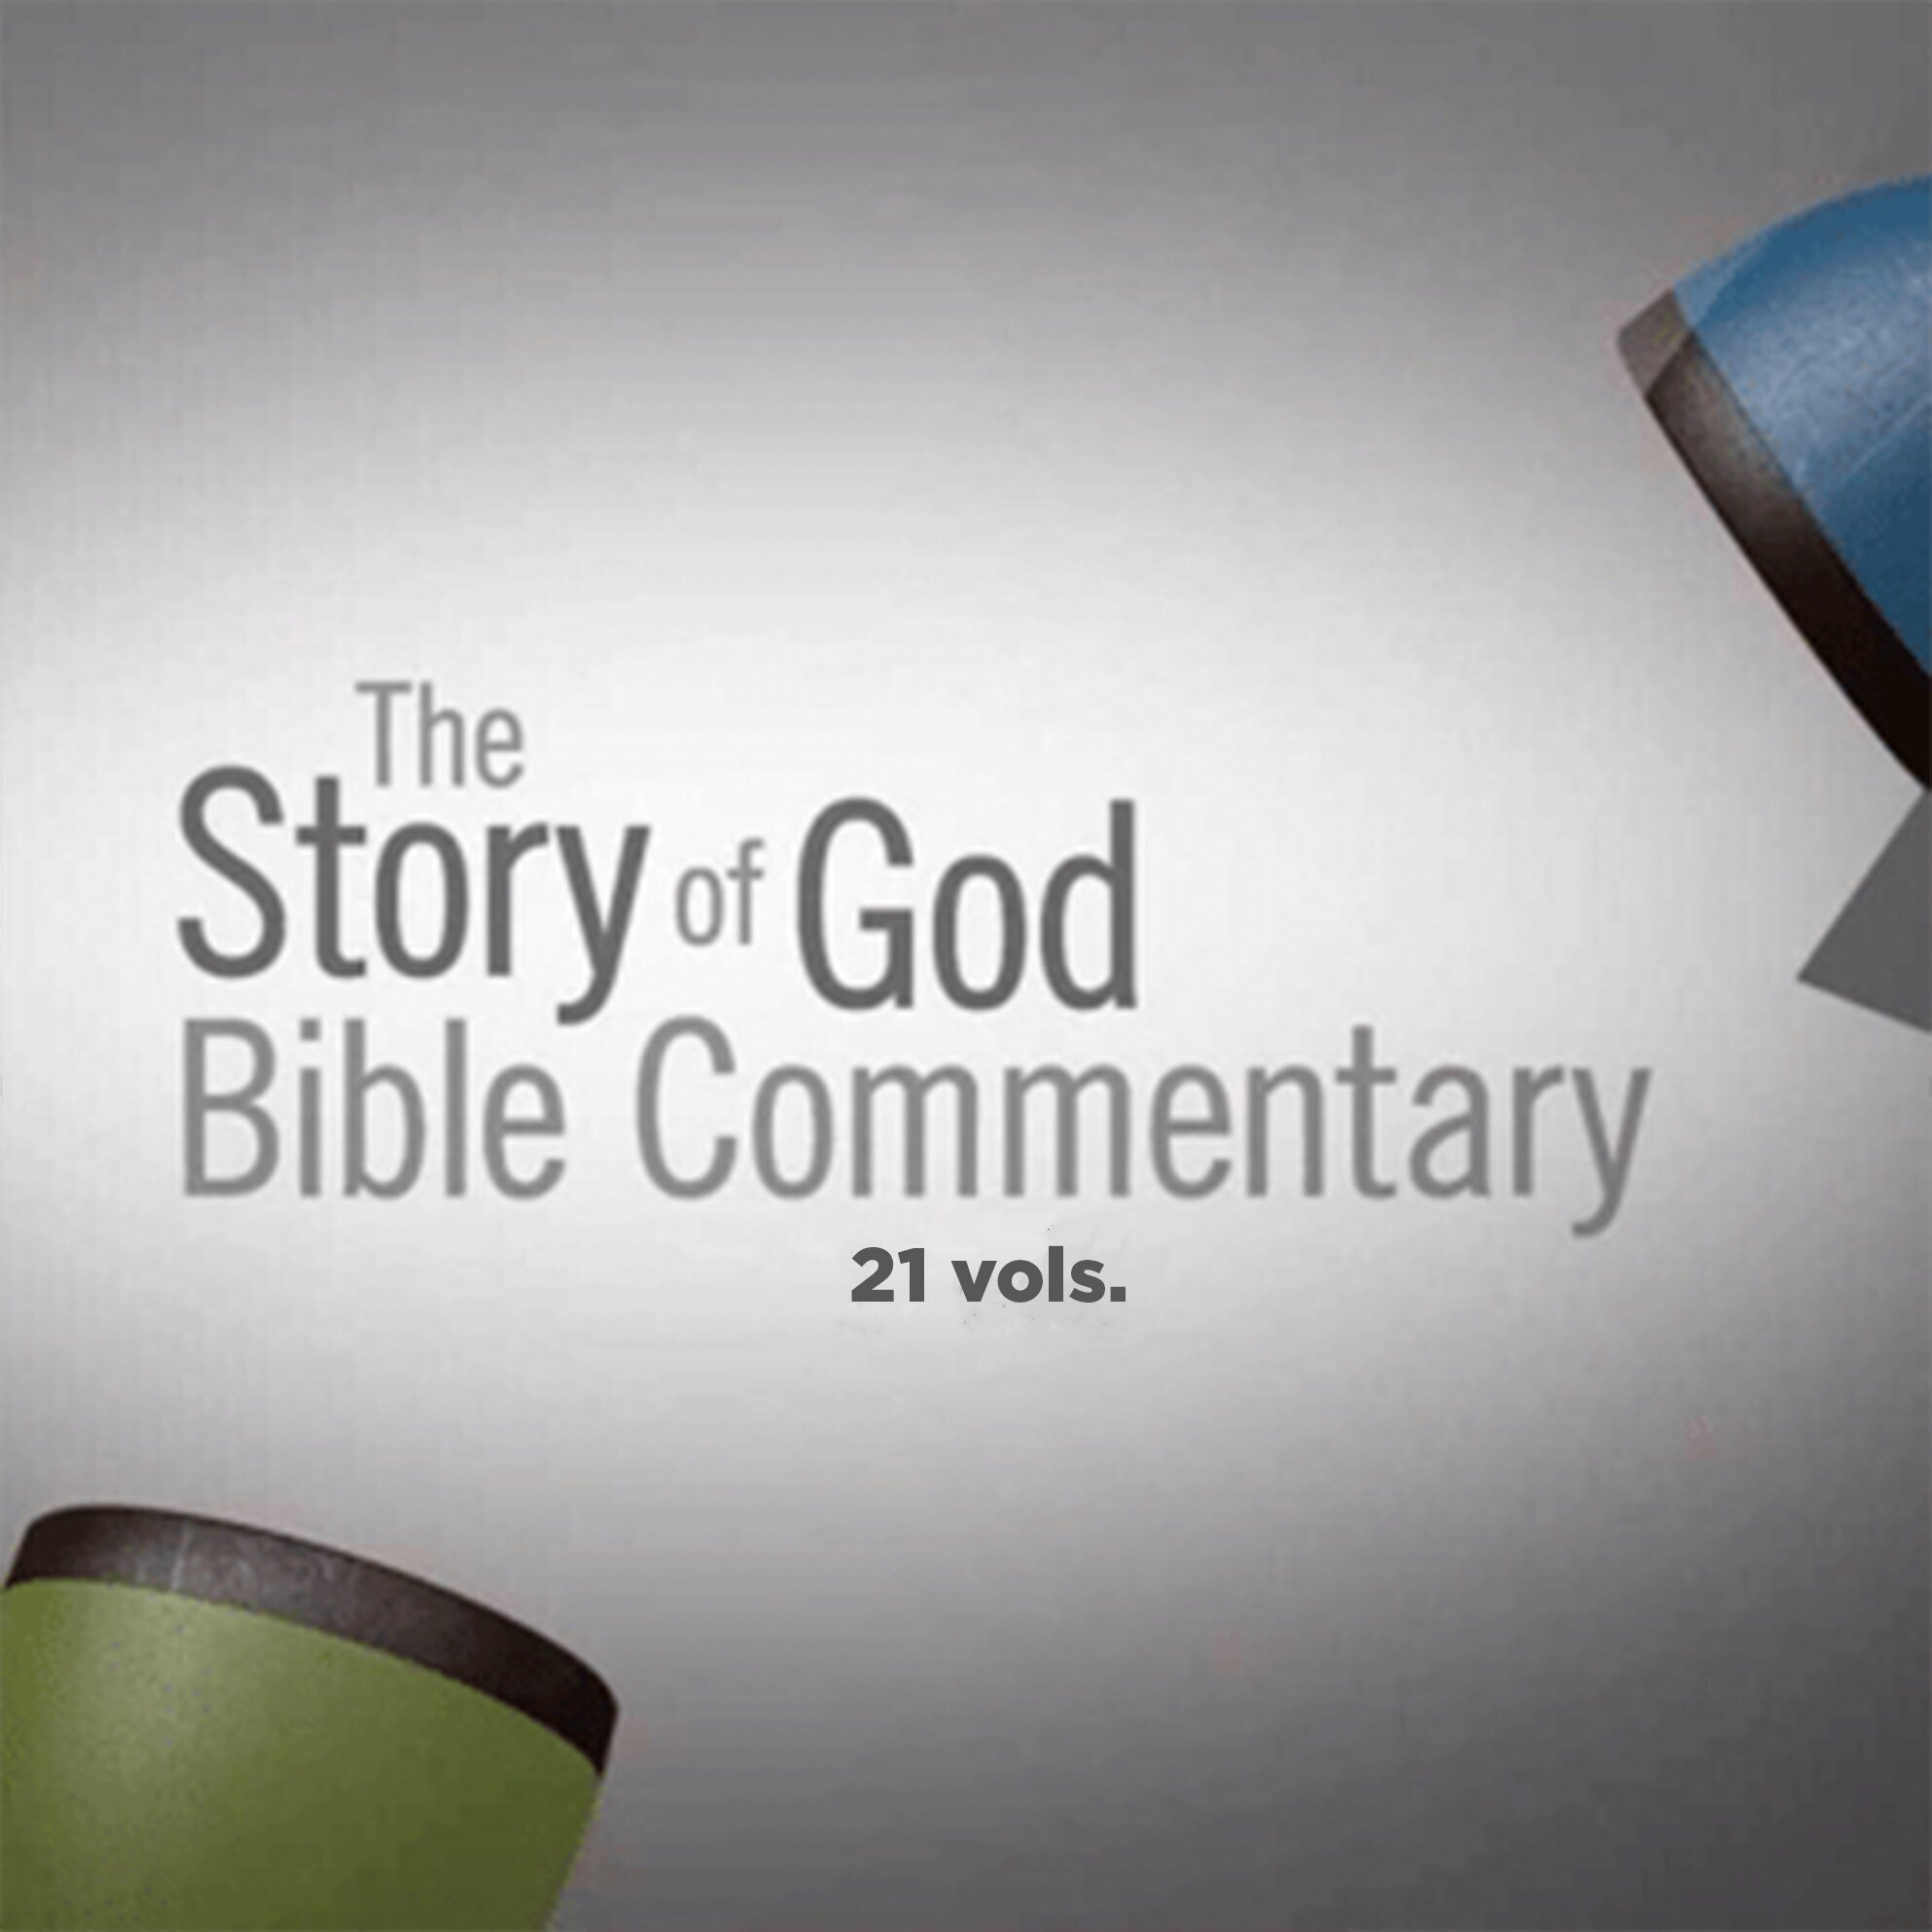 The Story of God Bible Commentary | SGBC (21 vols.)